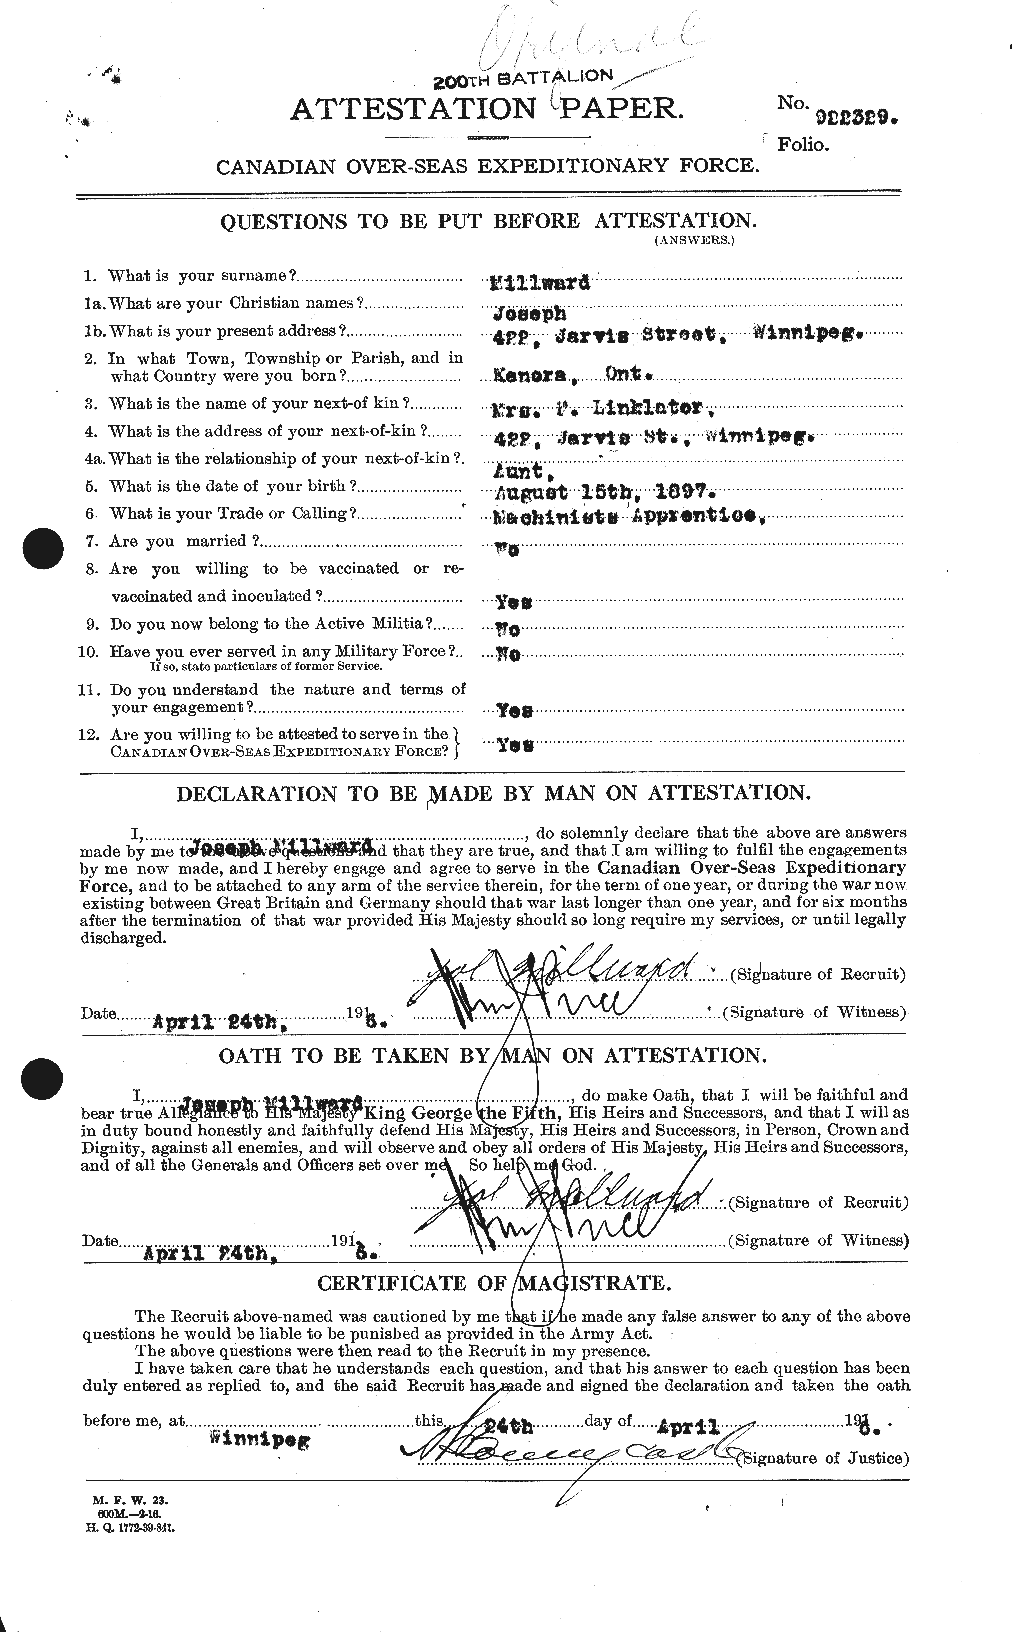 Personnel Records of the First World War - CEF 499371a